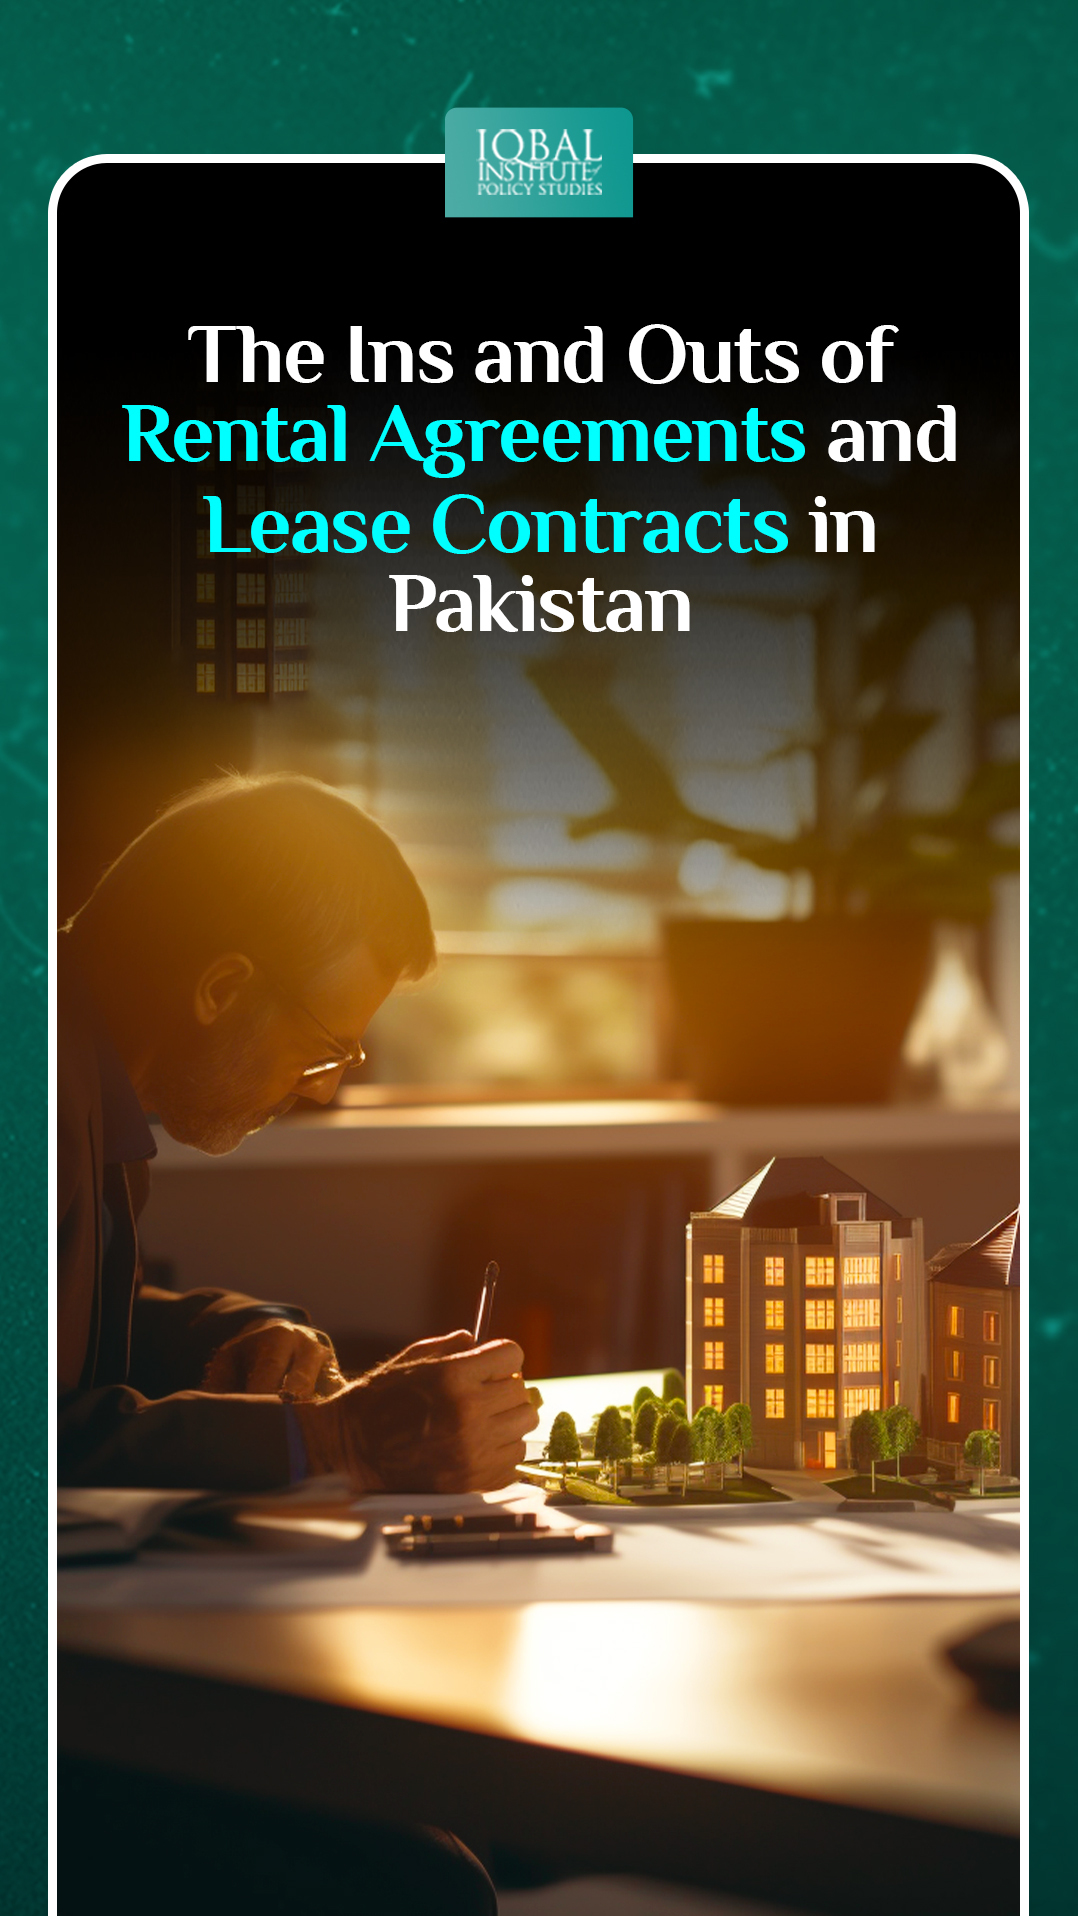 The Ins and Outs of Rental Agreements and Lease Contracts in Pakistan